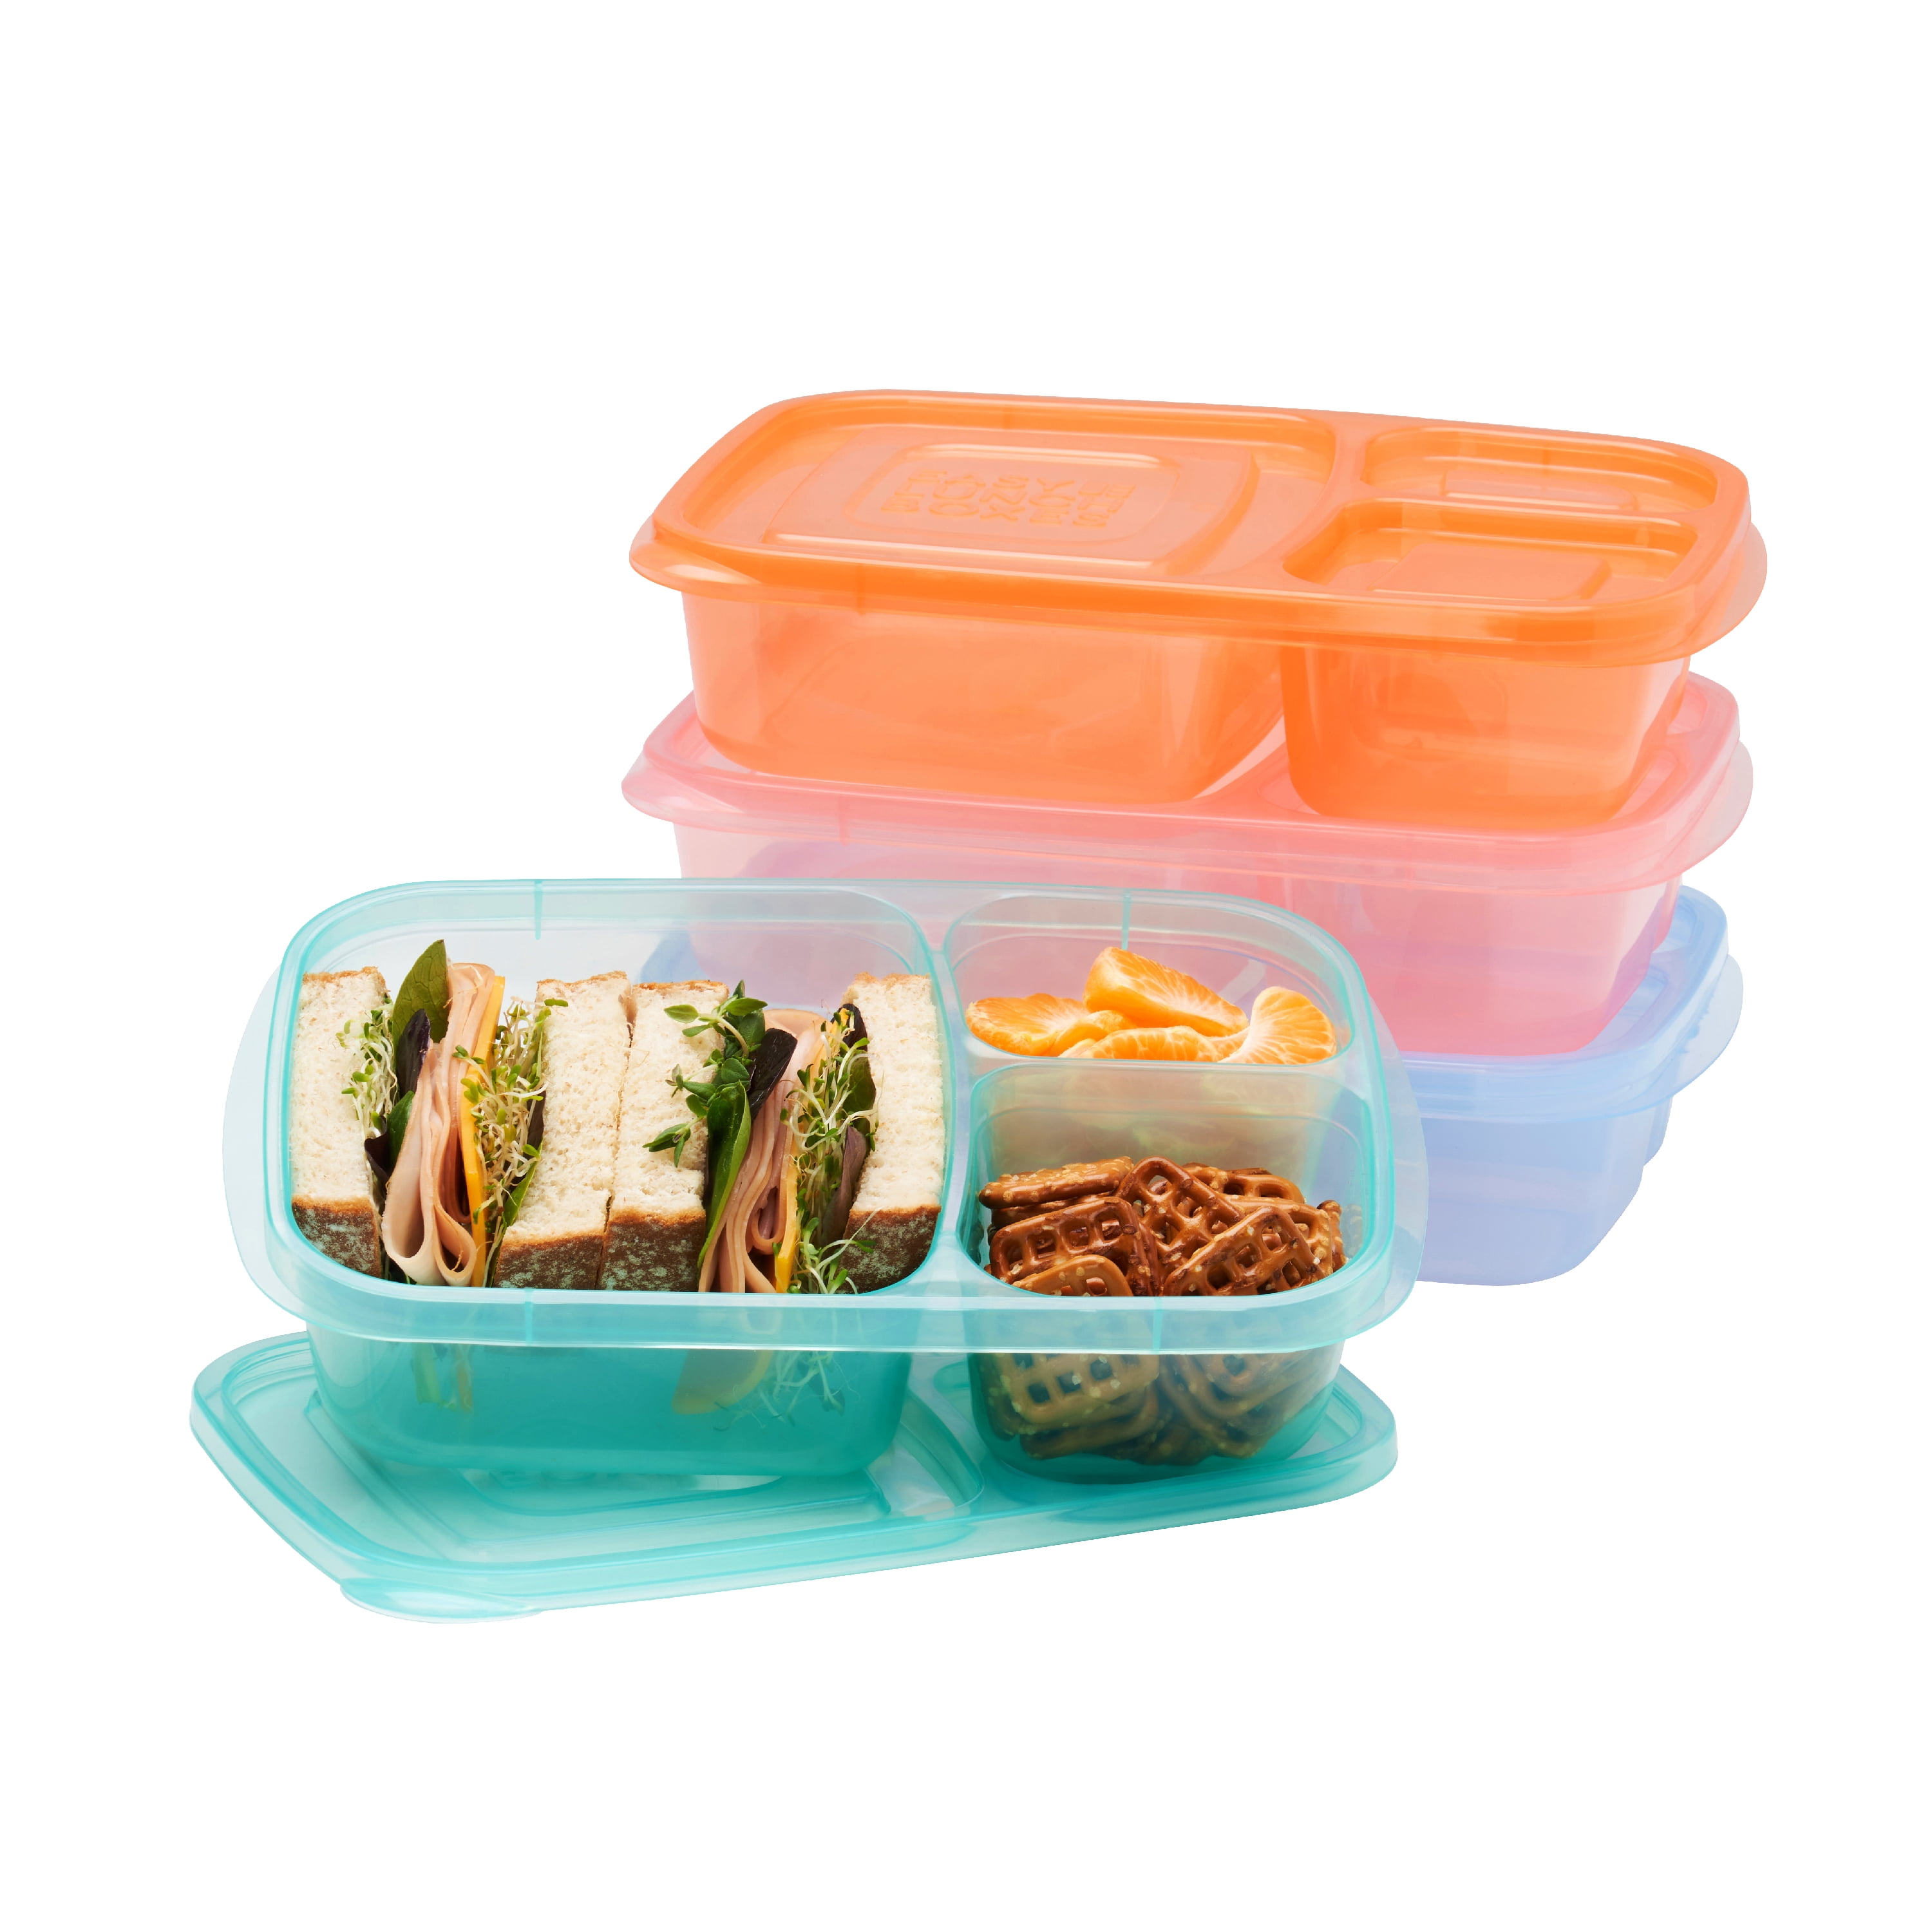 Easylunchboxes - Bento Lunch Boxes - Reusable 5-Compartment Food Containers for School, Work, and Travel, Set of 4 (Classic)